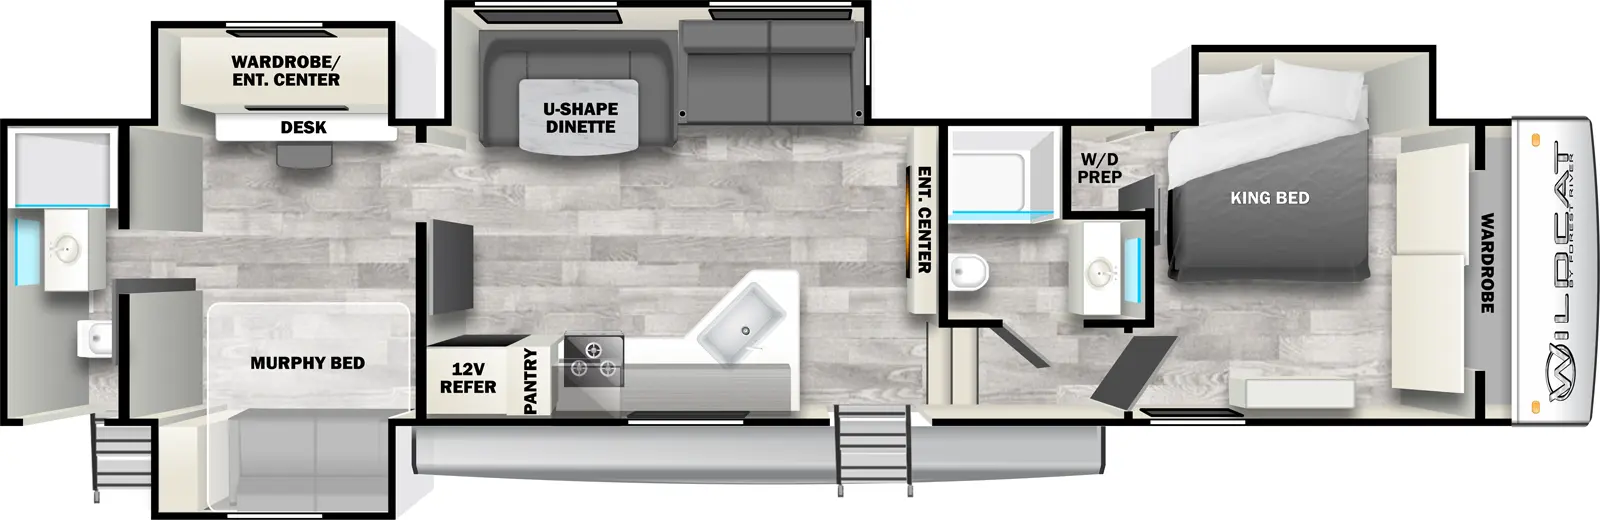 The 41DS has four slideouts and two entries. Interior layout front to back: wardrobe, off-door side king bed slideout, and closet with washer/dryer prep; off-door side full bathroom; steps down to entry and main living area; entertainment center along inner wall; off-door side slideout with seating and dinette; door side kitchen counter with sink, cooktop, pantry, and 12V refrigerator; rear off-door side slideout with desk, and wardrobe/entertainment center, door side murphy bed sofa, and rear full bathroom with second entry.